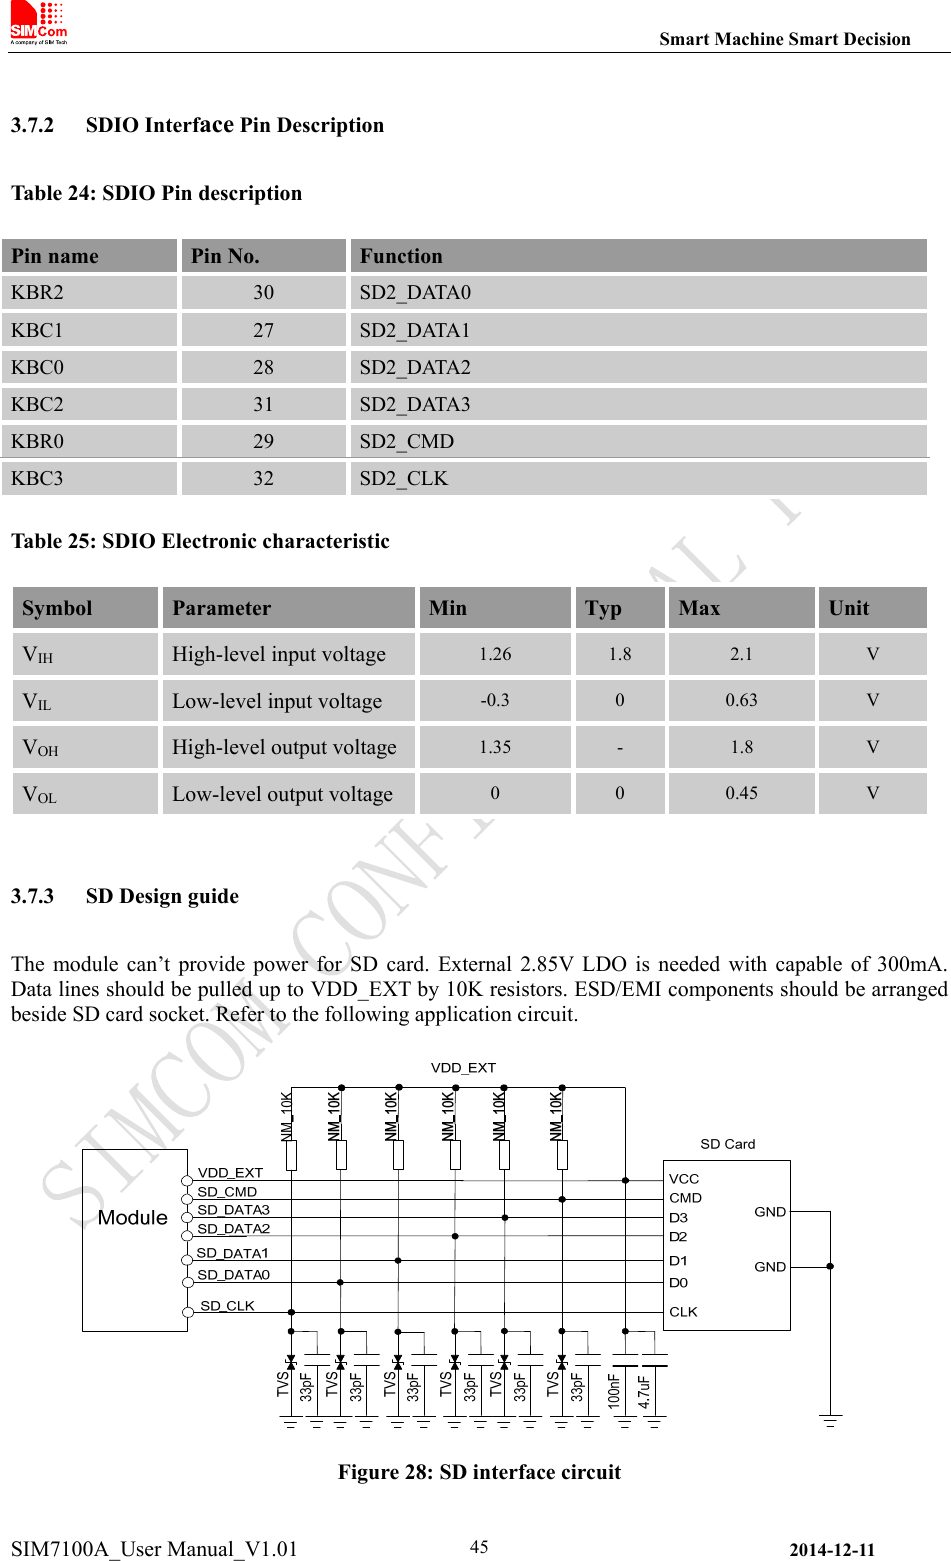                                                                Smart Machine Smart Decision SIM7100A_User Manual_V1.01                2014-12-11 45 3.7.2 SDIO Interface Pin Description Table 24: SDIO Pin description Table 25: SDIO Electronic characteristic Symbol  Parameter  Min  Typ  Max  Unit VIH High-level input voltage  1.26  1.8  2.1  V VIL Low-level input voltage  -0.3  0  0.63  V VOH High-level output voltage 1.35  -  1.8  V VOL Low-level output voltage  0  0  0.45  V  3.7.3 SD Design guide The  module can’t provide  power  for  SD  card. External  2.85V  LDO  is needed with capable of 300mA. Data lines should be pulled up to VDD_EXT by 10K resistors. ESD/EMI components should be arranged beside SD card socket. Refer to the following application circuit.   Figure 28: SD interface circuit Pin name  Pin No.  Function KBR2 30 SD2_DATA0 KBC1 27 SD2_DATA1 KBC0 28 SD2_DATA2 KBC2 31 SD2_DATA3 KBR0 29 SD2_CMD KBC3 32 SD2_CLK 